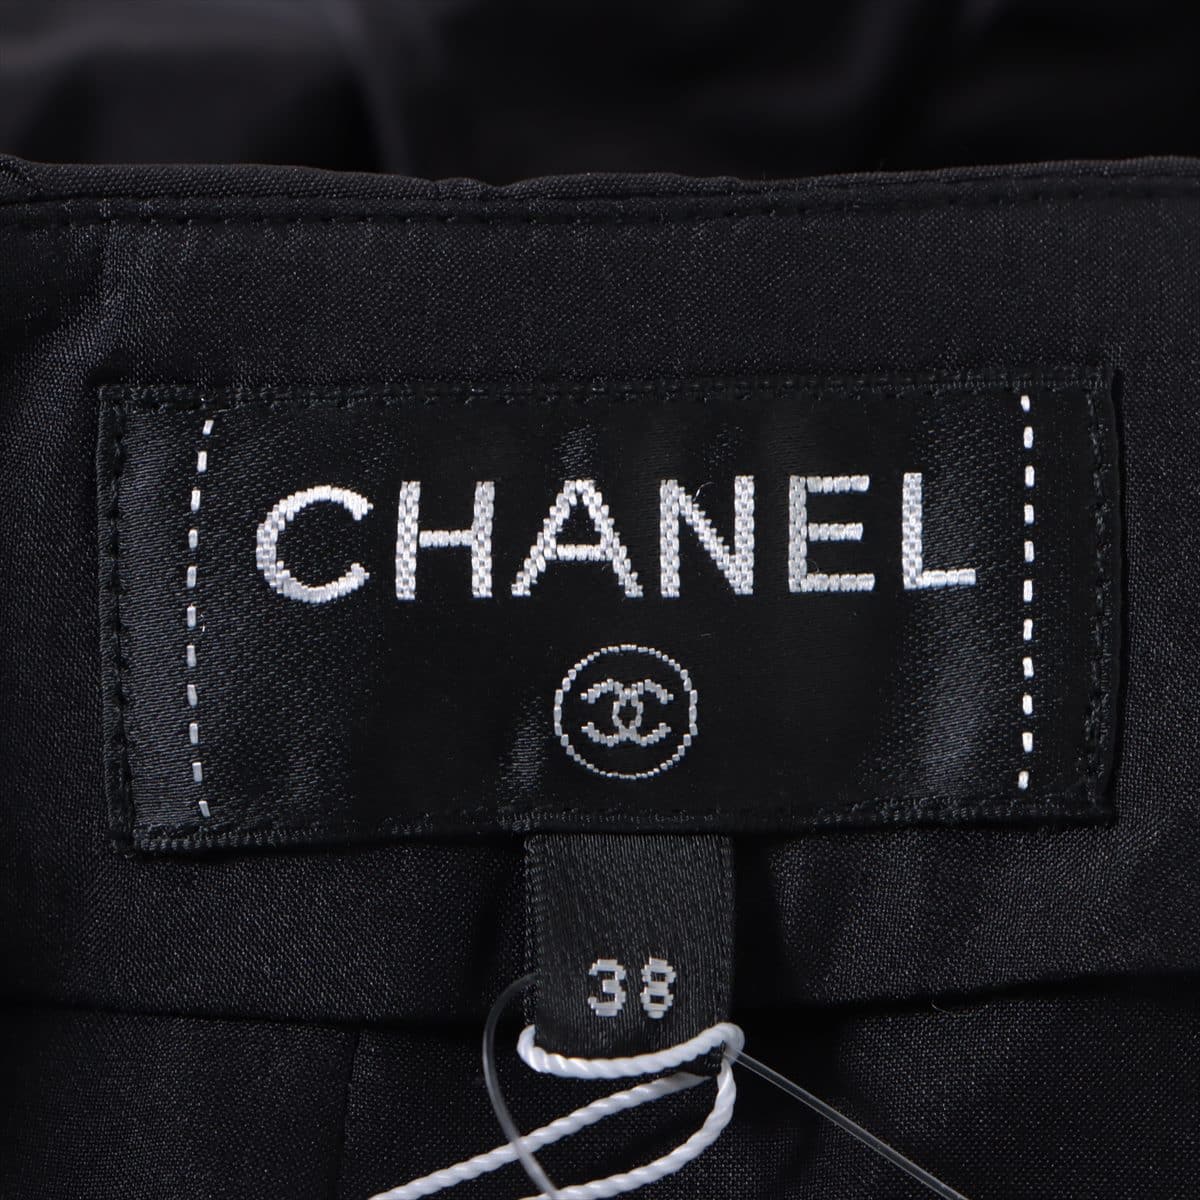 Chanel Coco Mark P71 Polyester & nylon Skirt 38 Ladies' Black  quilting